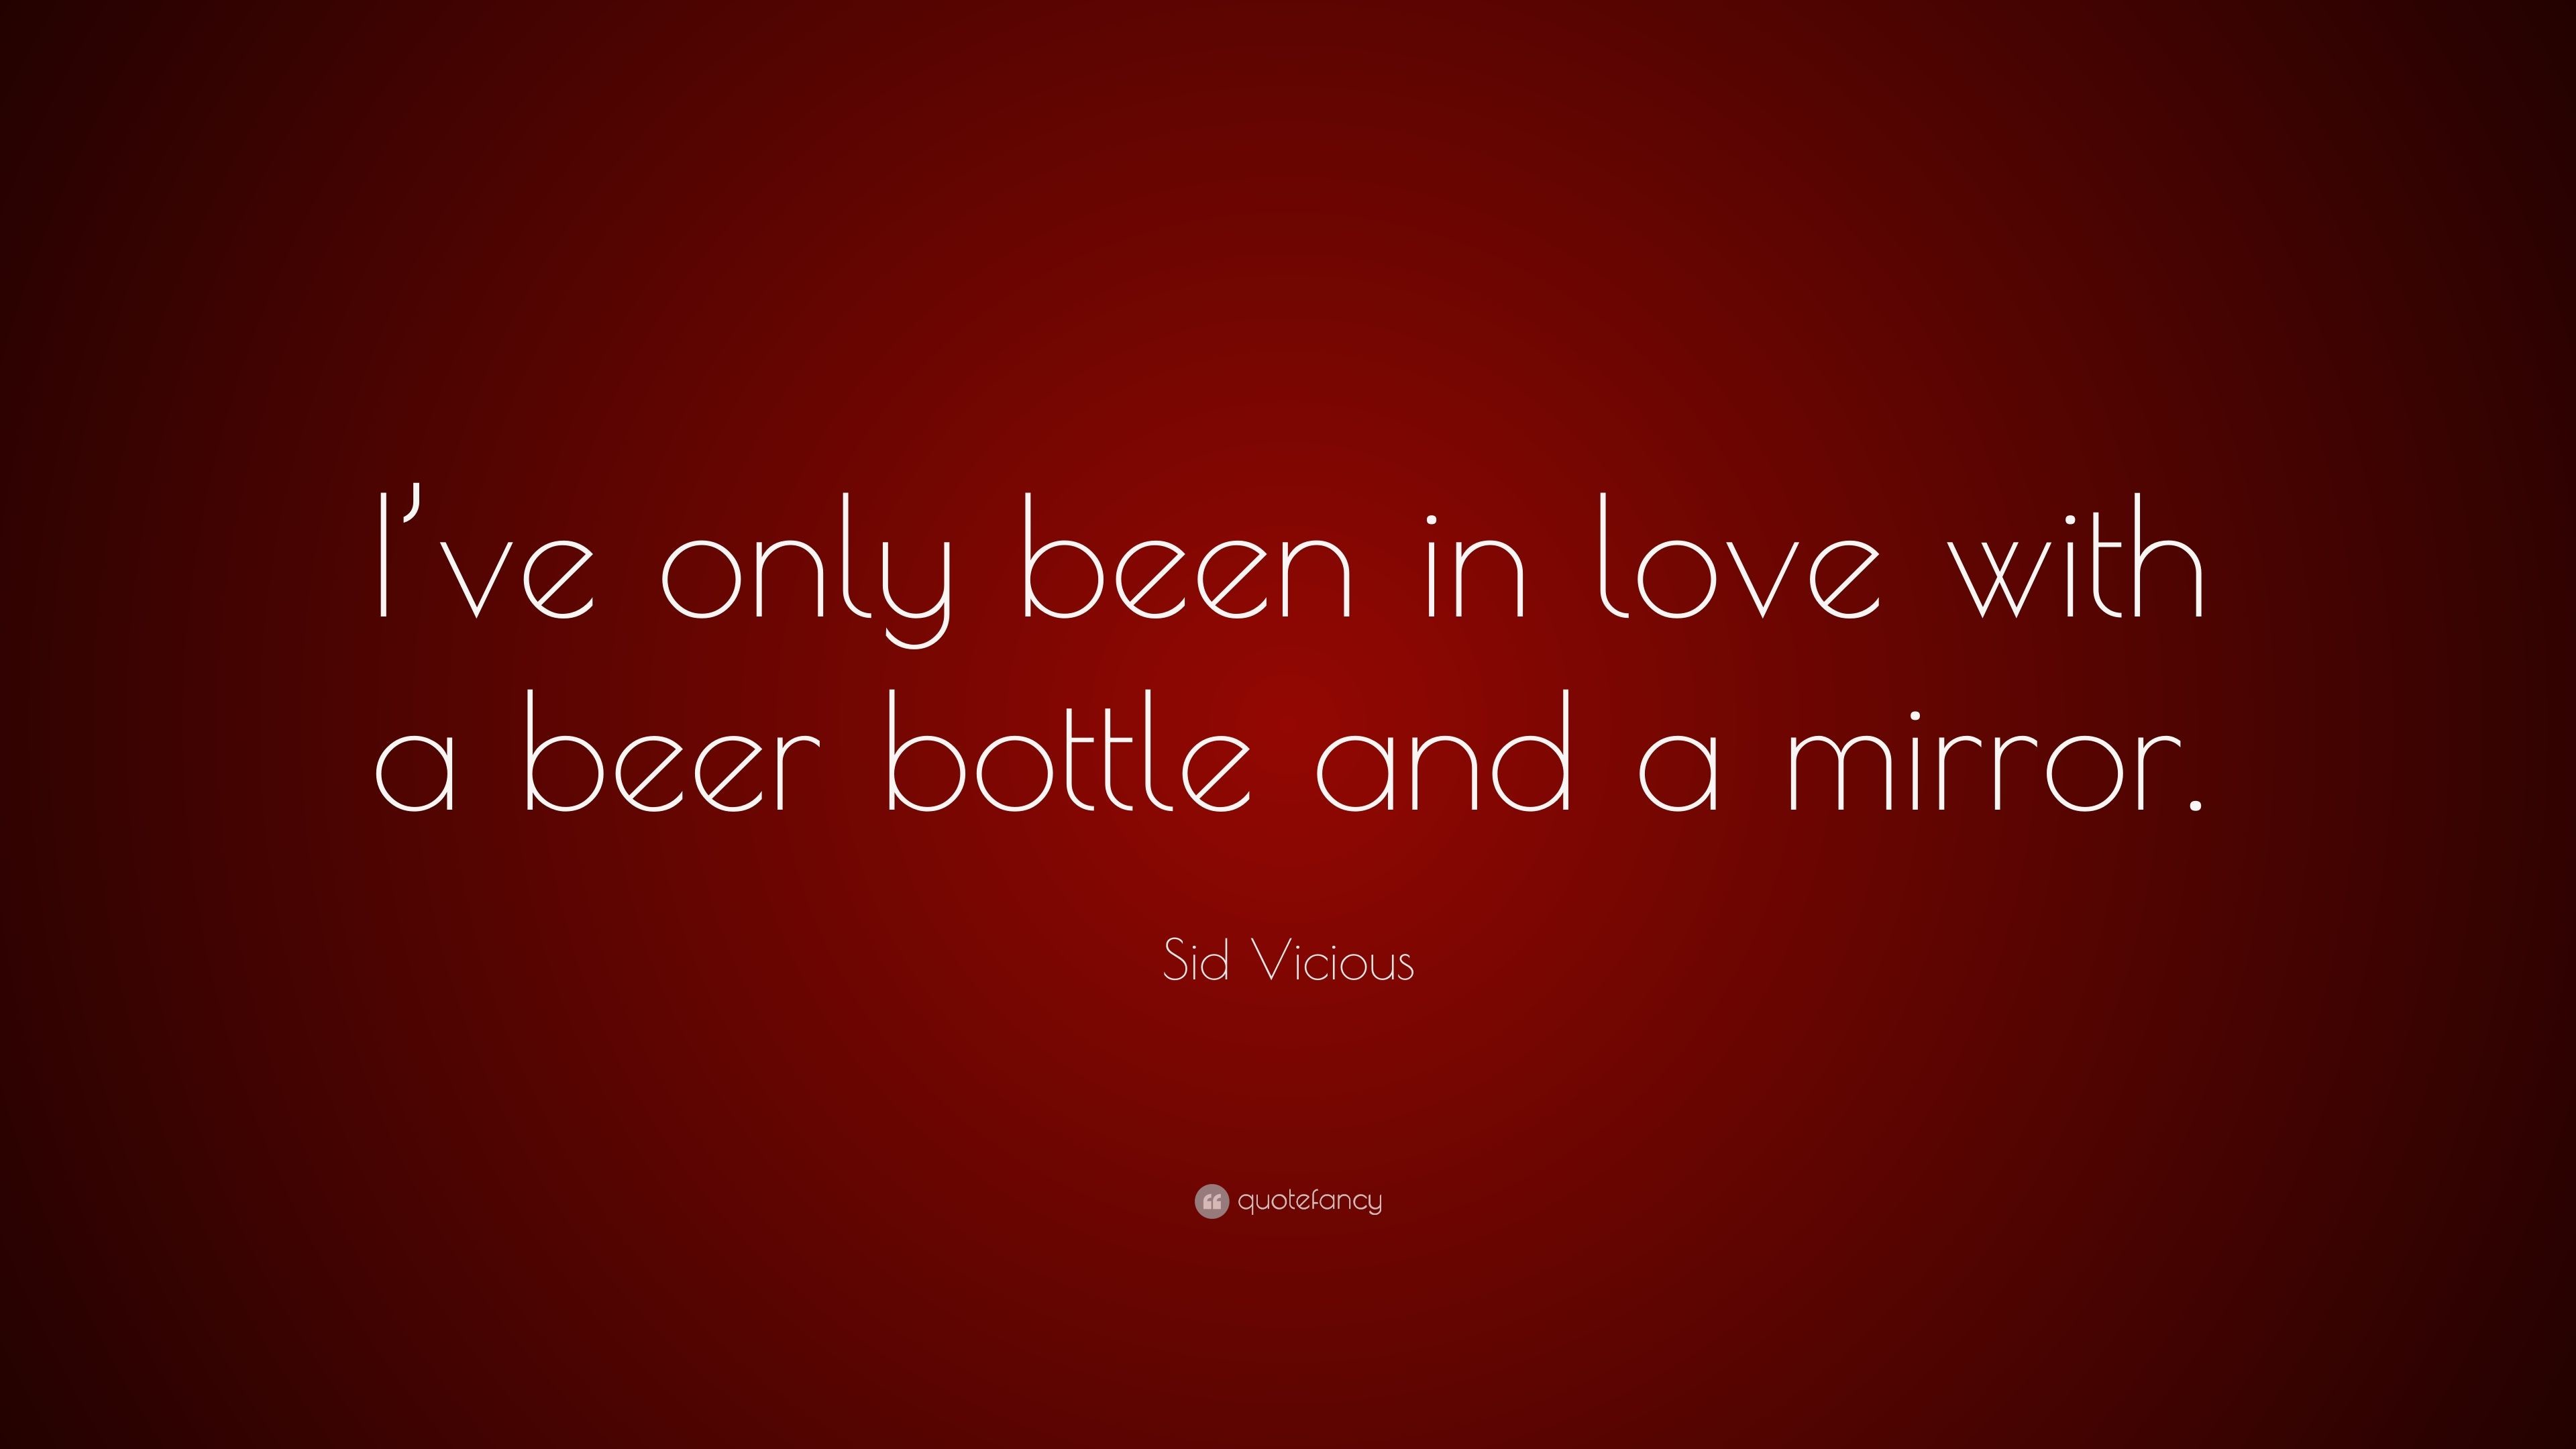 3840x2160 Sid Vicious Quote: “I've only been in love with a beer bottle